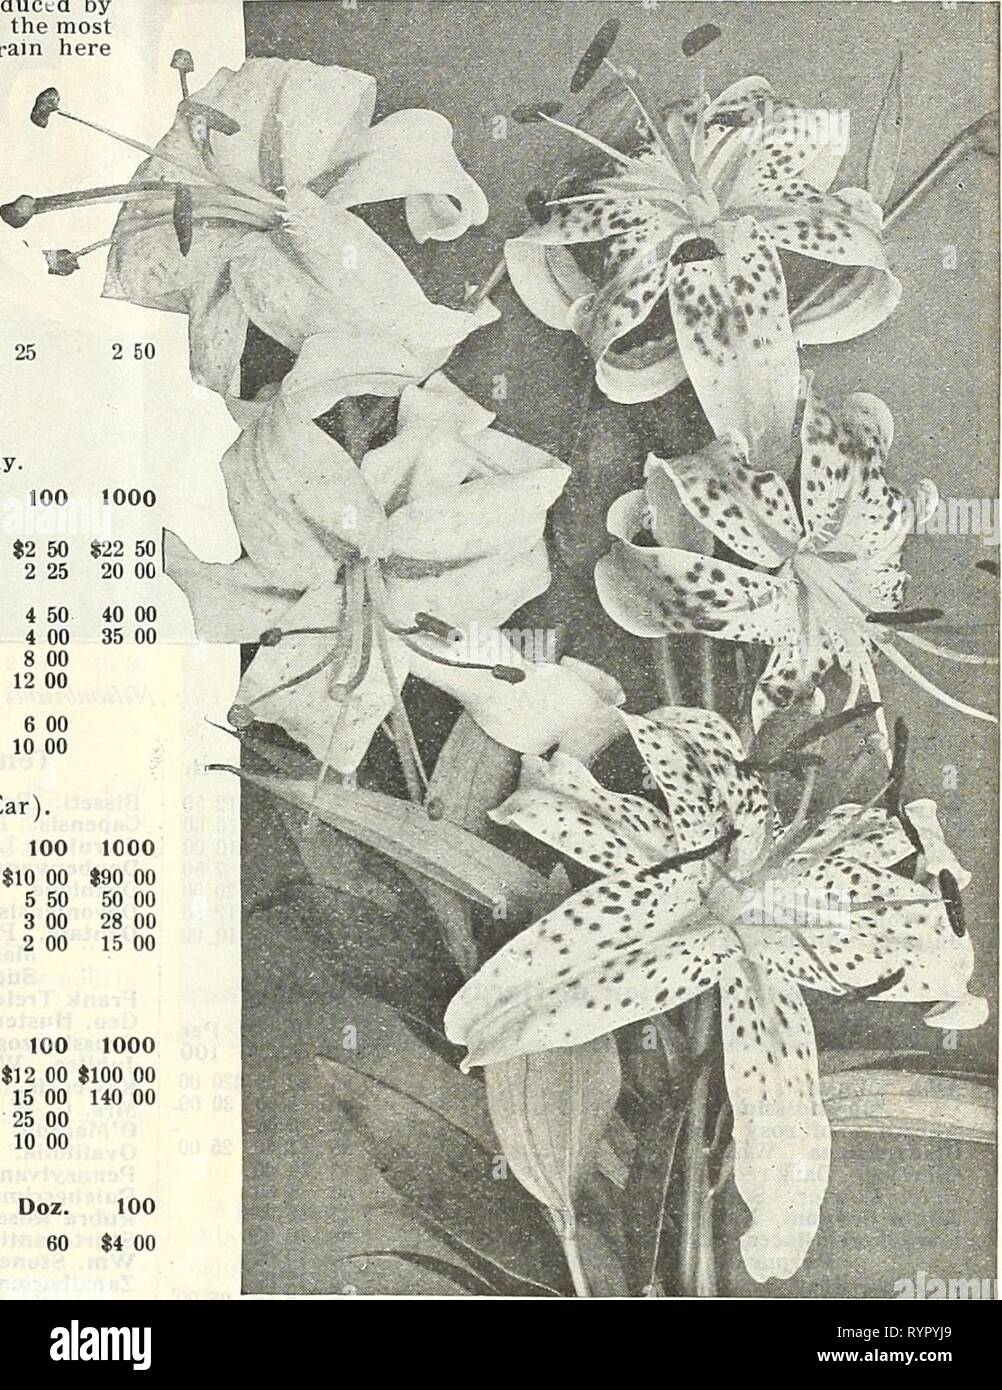 Dreer's wholesale price list  Dreer's wholesale price list : flower seeds for florists plants for florists bulbs for florists fertilizers, fungicides, insecticides, implements, etc . dreerswholesalep1916henr Year: 1916  HENRY A. DREER, PHILADELPHIA, PA., WHOLESALE PRICE LIST 21 SUMMER FLOWERING BULBSâcontinued Amaryllis. Dreer's American Hybrids. Grown from seed produced by crossing the finest named varieties obtained from the most noted specialists, and we believe the resulting strain here offered to be superior in size, vigor and coloring to anything yet offered. Strong bulbs, 50 cts. each;  Stock Photo